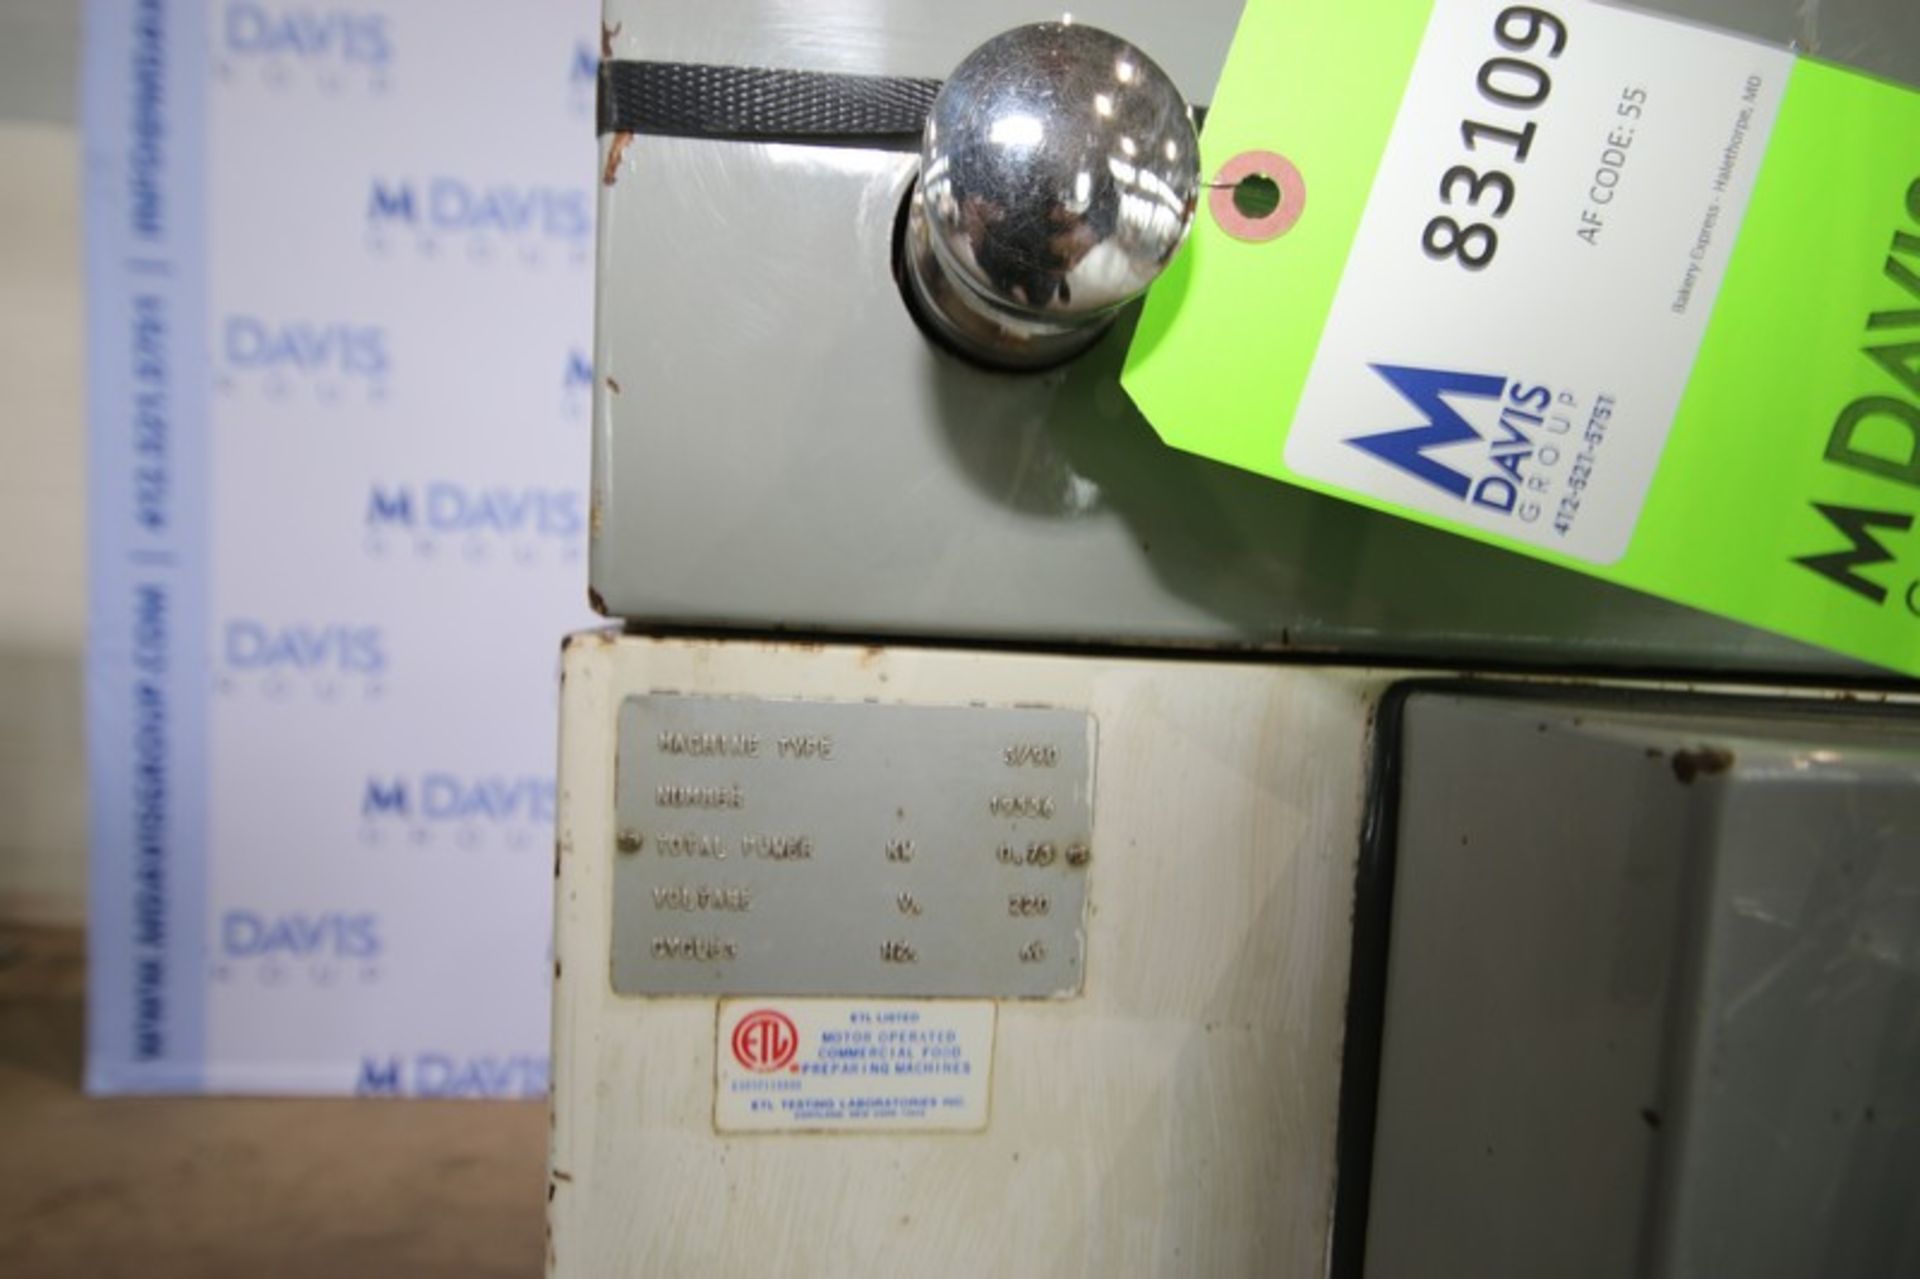 Empire Bagel Machine, Machine Type S/90, S/N 19556, 220 Volts, 1 Phase, with Aprox. 3-1/2"" Belt, - Image 3 of 9